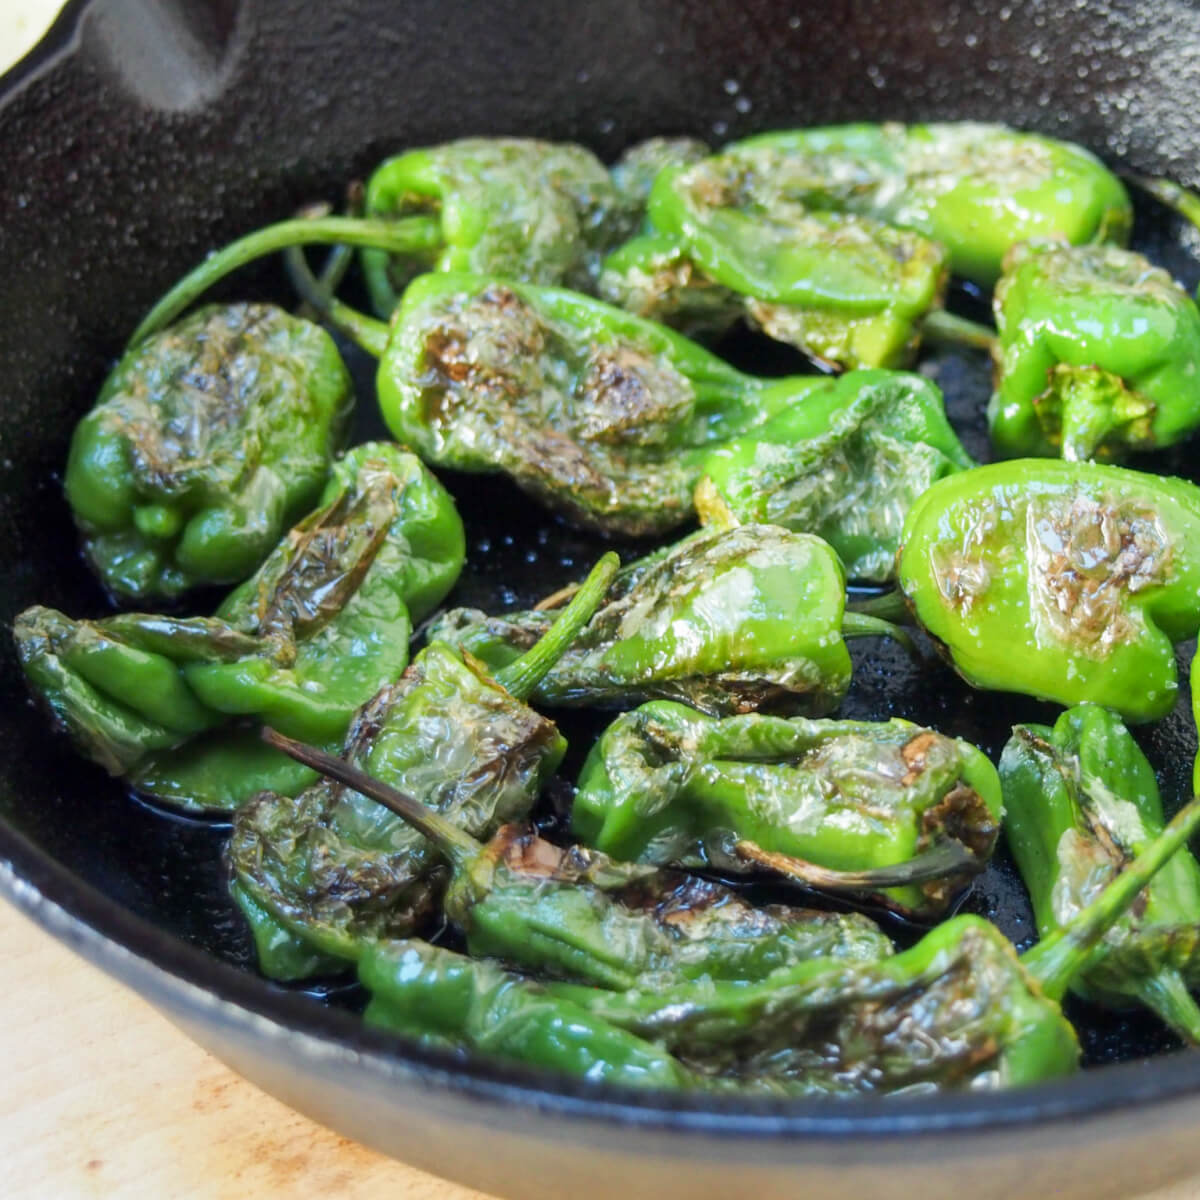 Blistered Padron peppers (pimientos de Padrón) - Caroline's Cooking